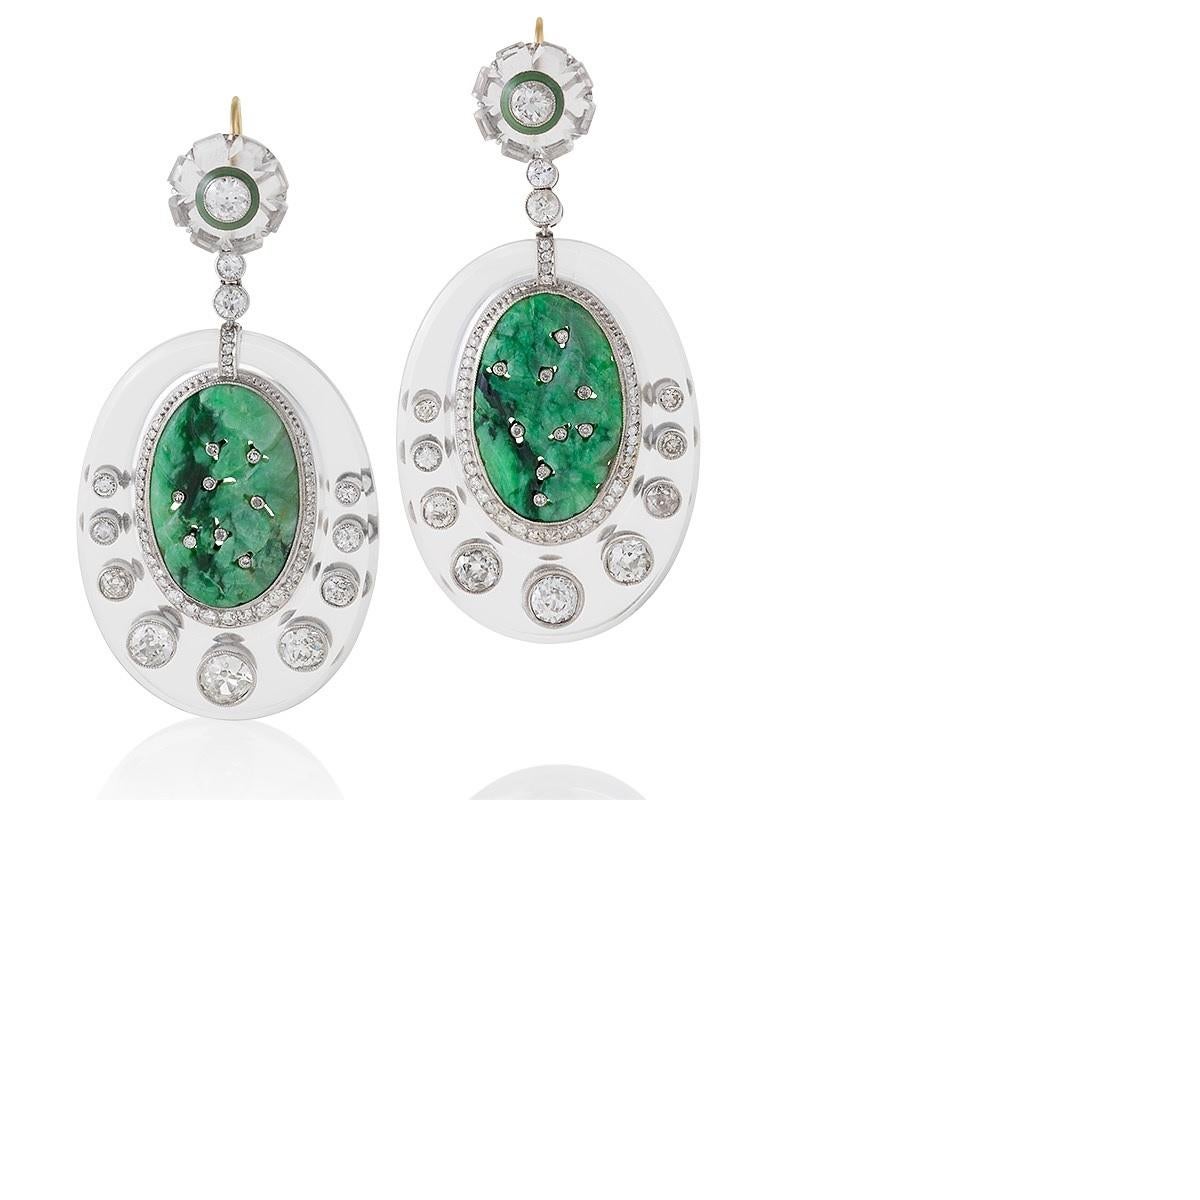 A pair of Art Deco platinum earrings with jade, diamond, enamel and rock crystal. The earrings have foliate carved jade centers, decorated and surrounded by 126 old European-cut diamonds with an approximate total weight of 6.60 carats. The carved